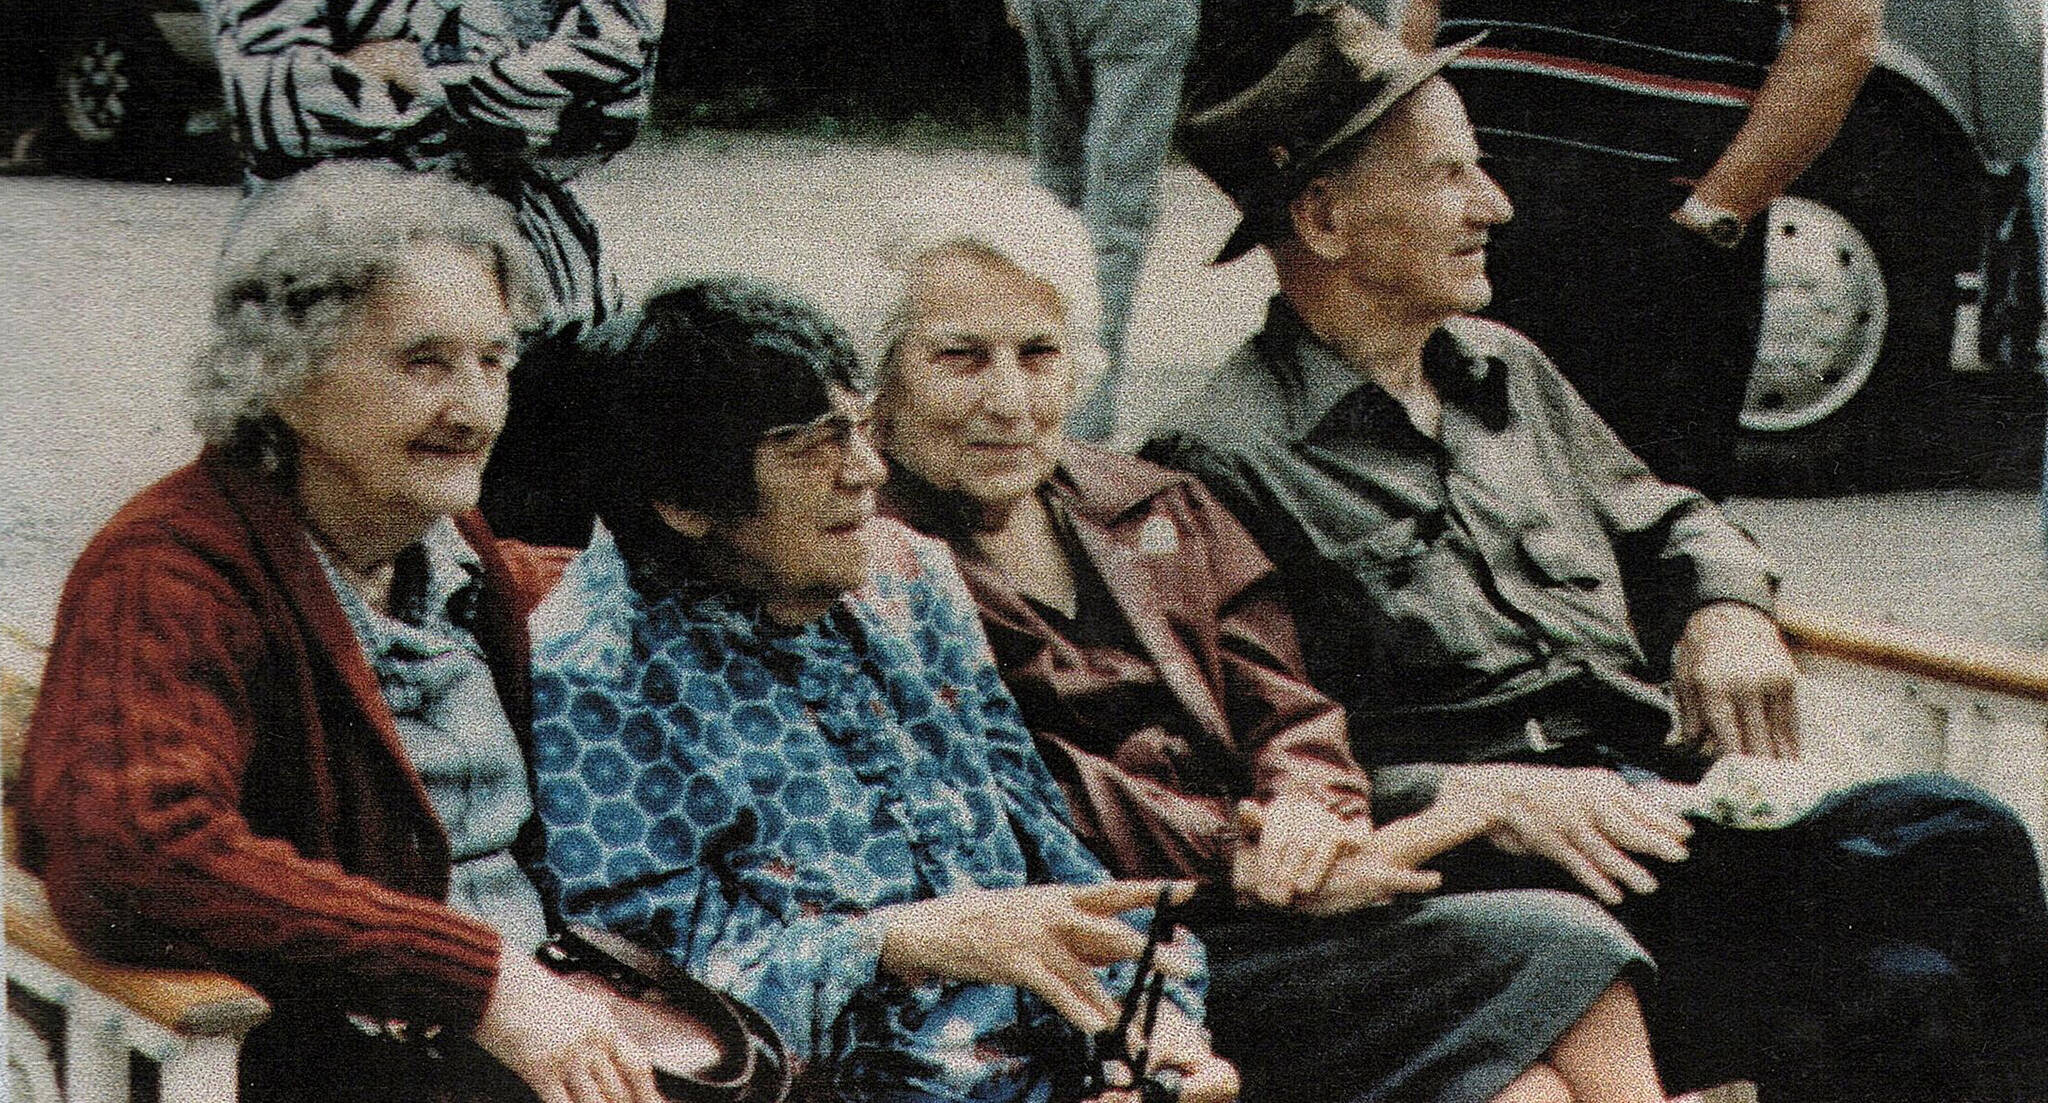 Photo 210.029.161, from the Clark Collection, courtesy of Hope and Sunrise Historical and Mining Museum 
In the seats of honor at the 1988 Hope Centennial Parade are (L-R) Helen DeFrance, Annie Hatch, and Emma and Carl Clark.